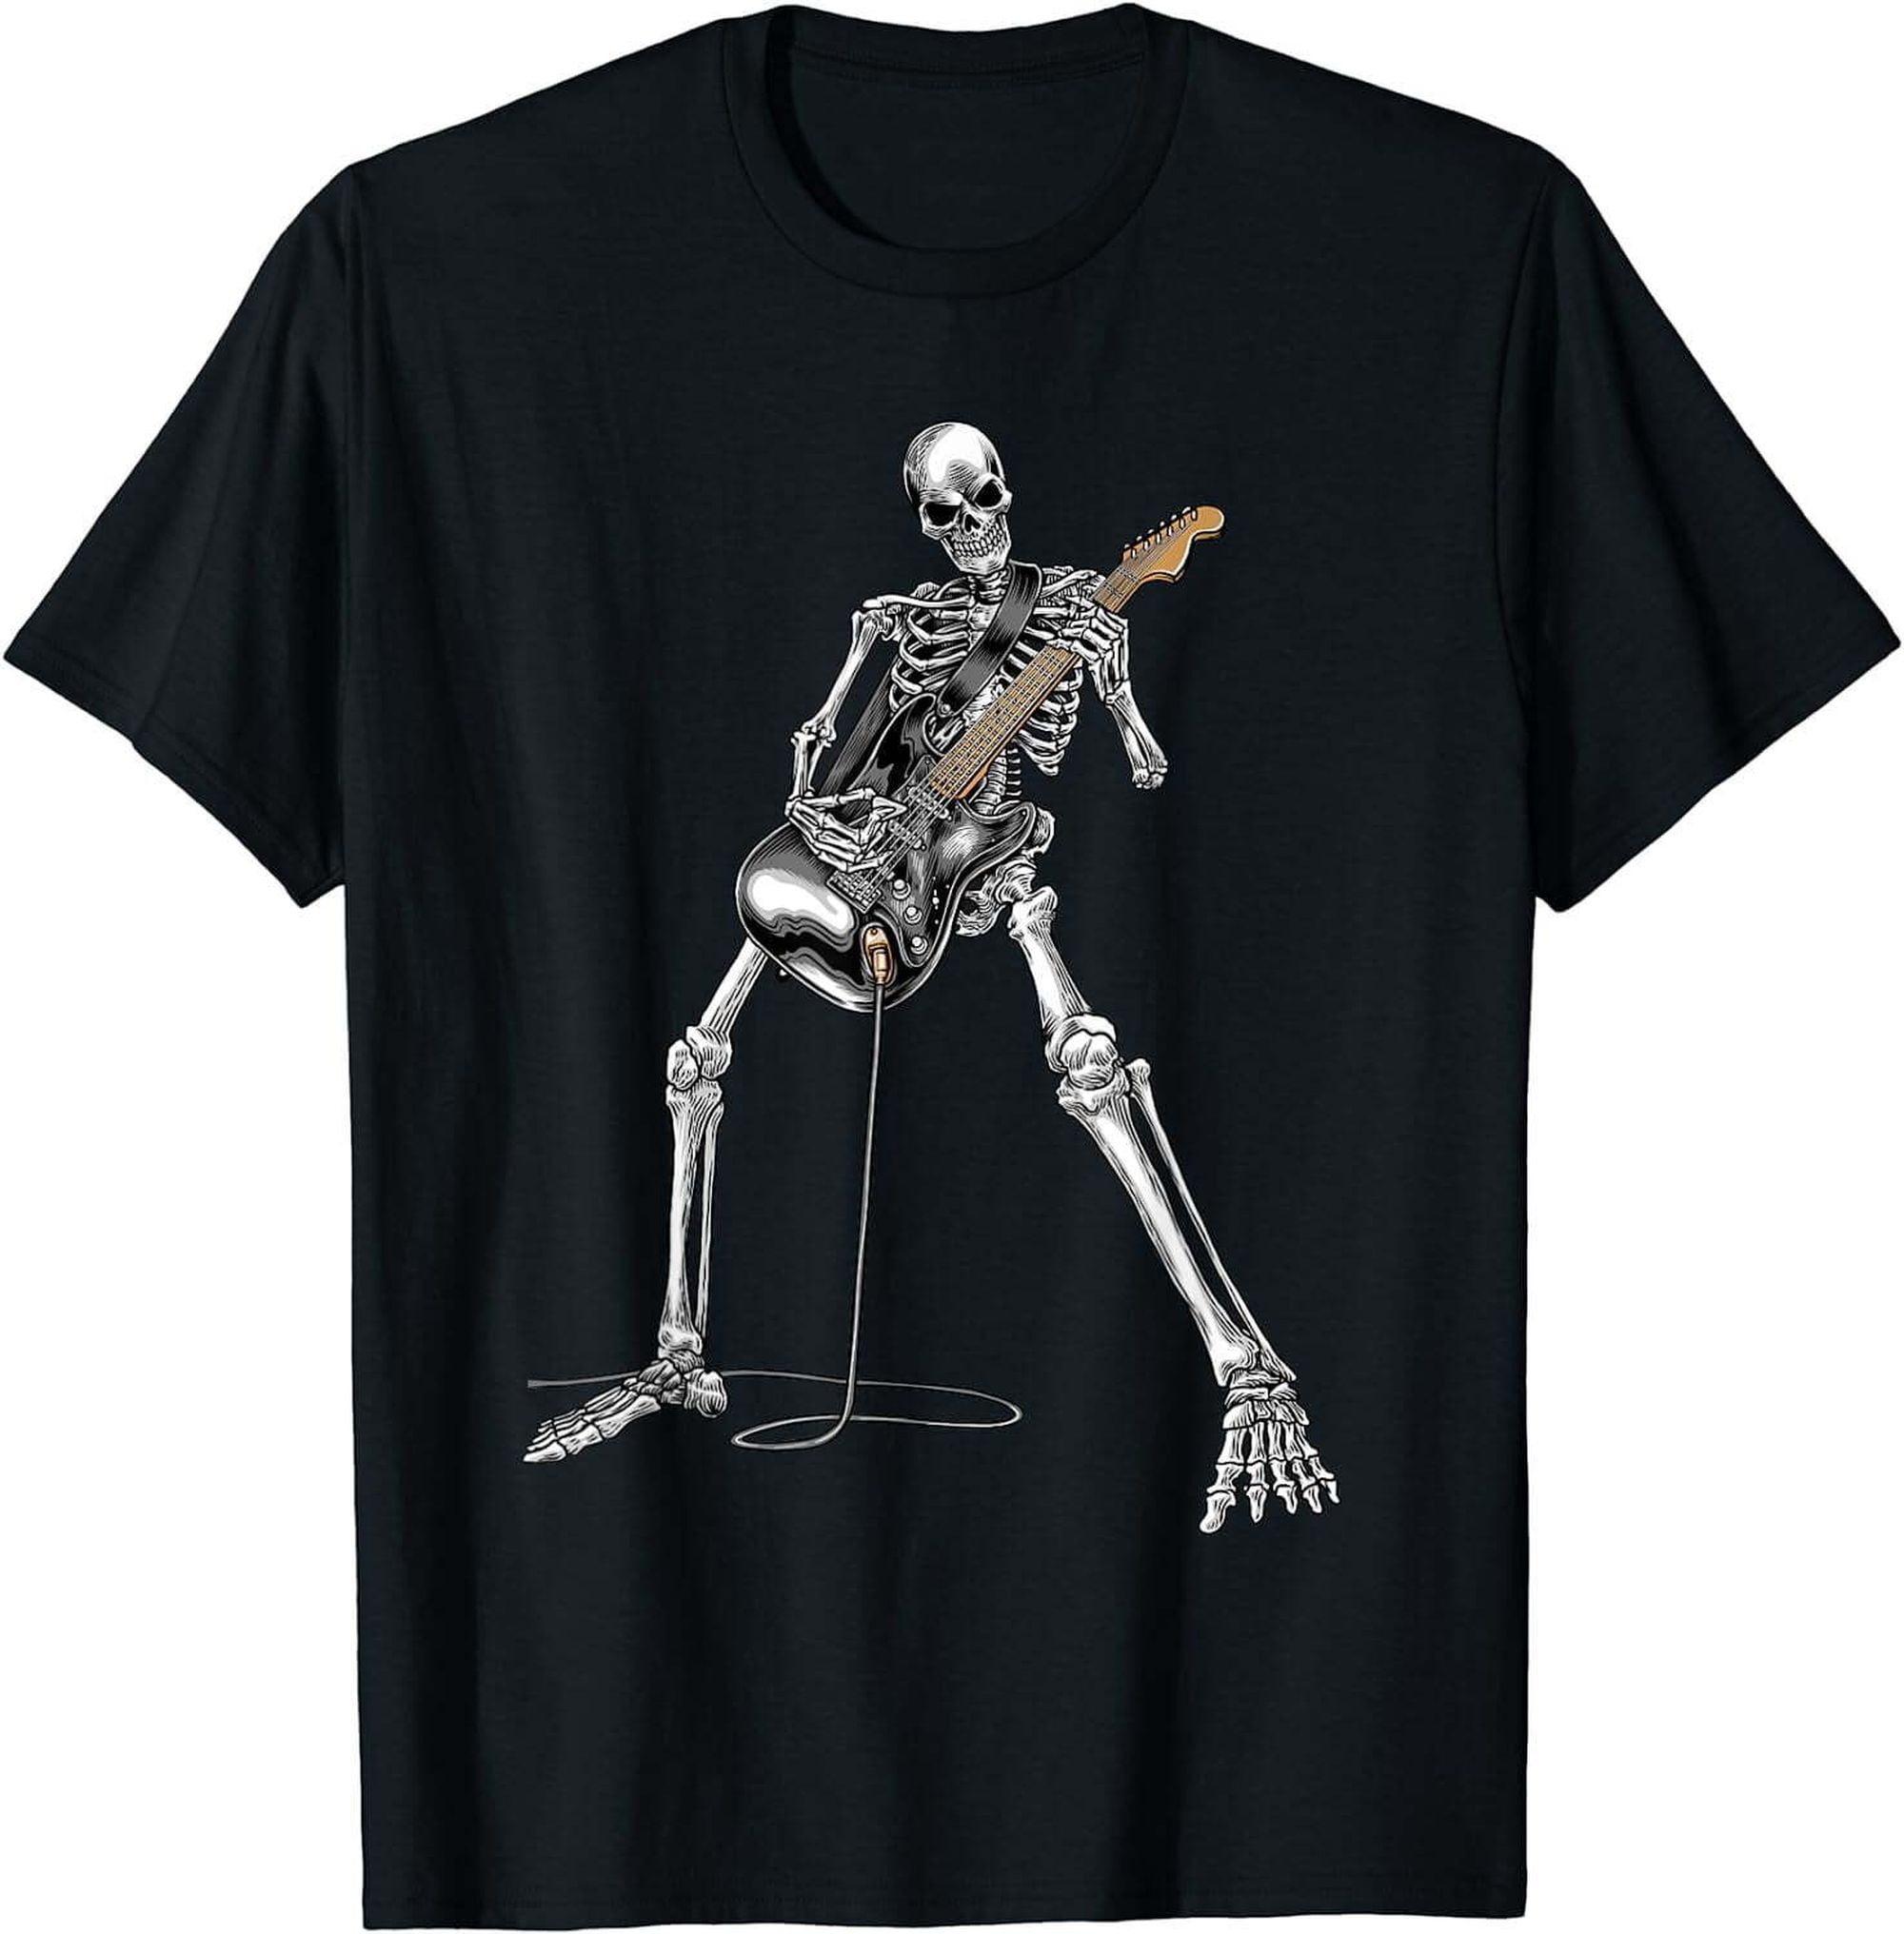 Rock and Roll Guitar Band Tee for Men - Classic Band Shirts with ...